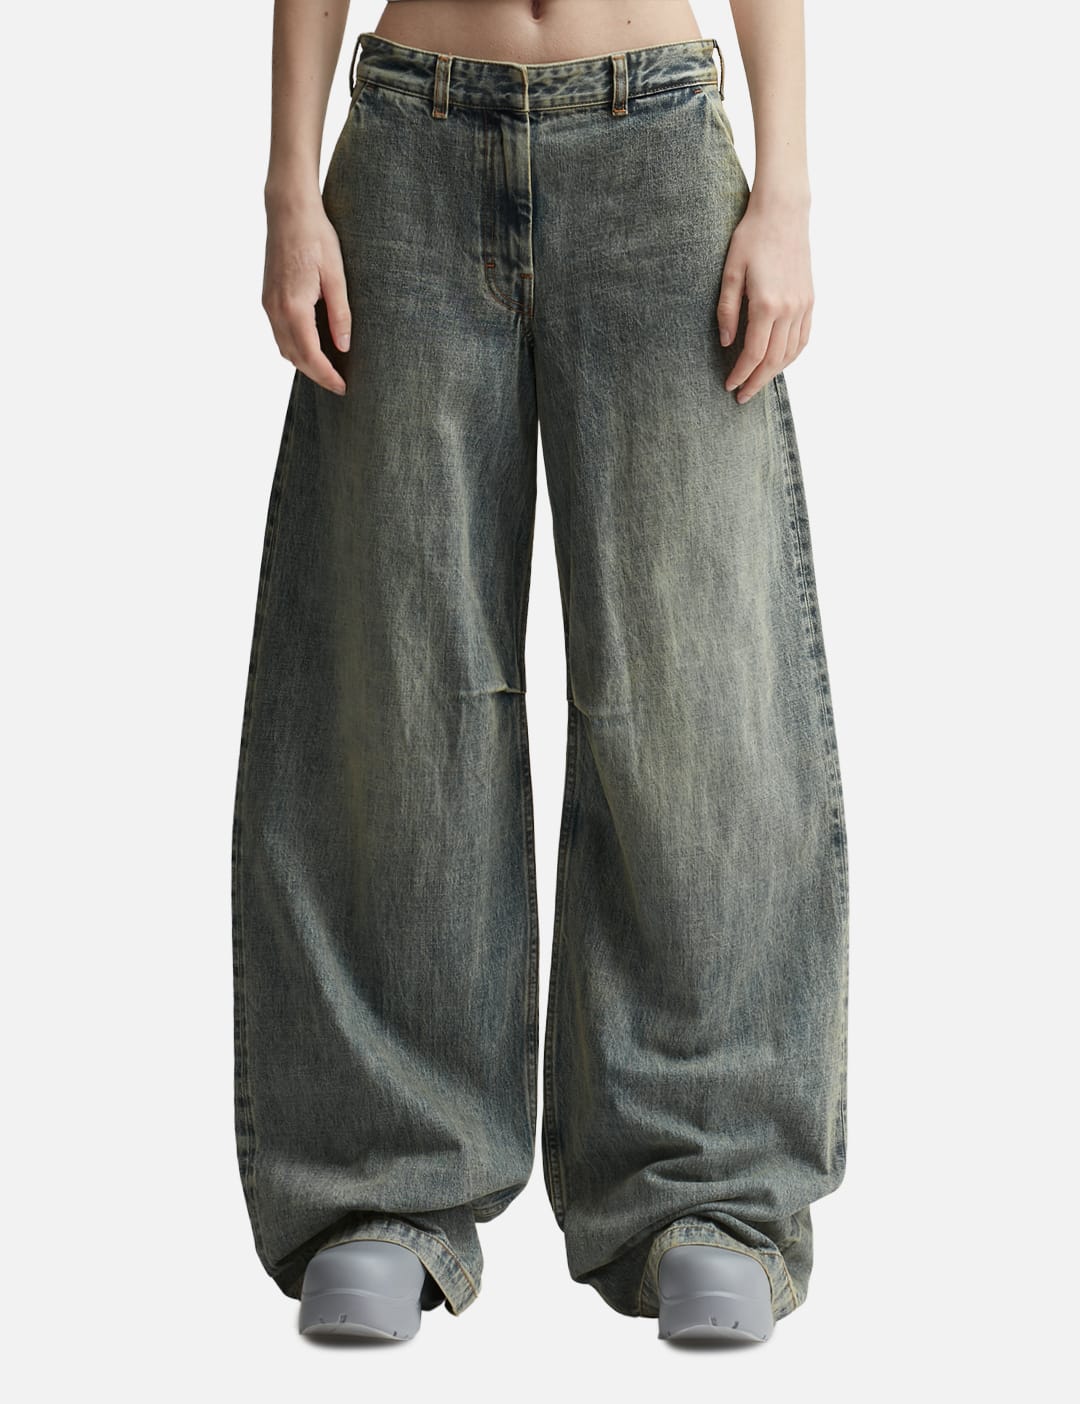 Aalto - Jeans With Pleats | HBX - Globally Curated Fashion and